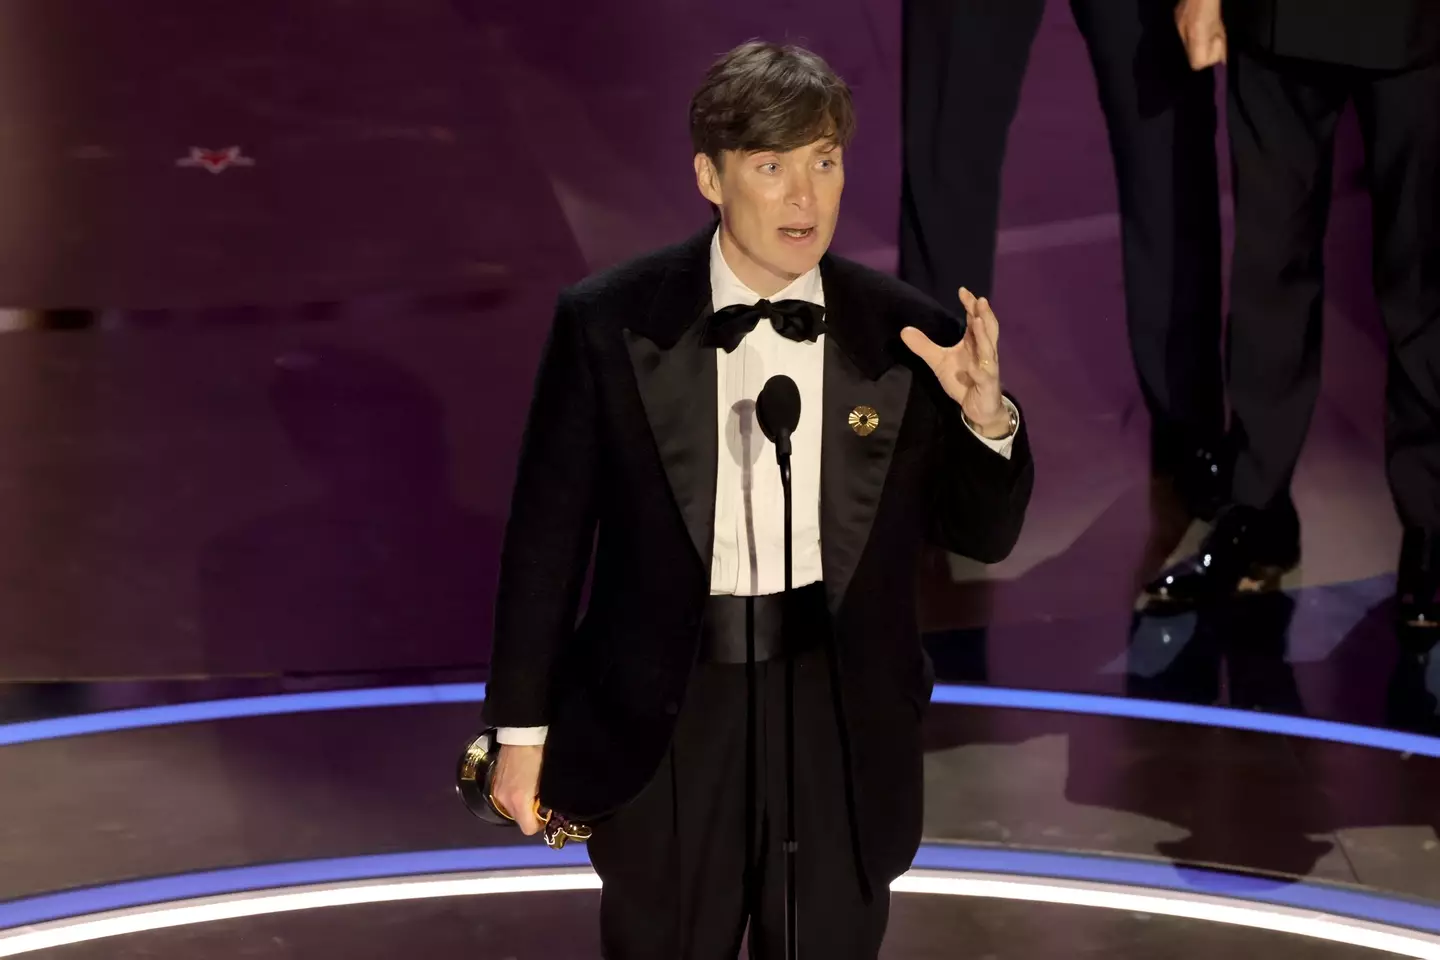 Cillian Murphy accepts the award for Best Actor.